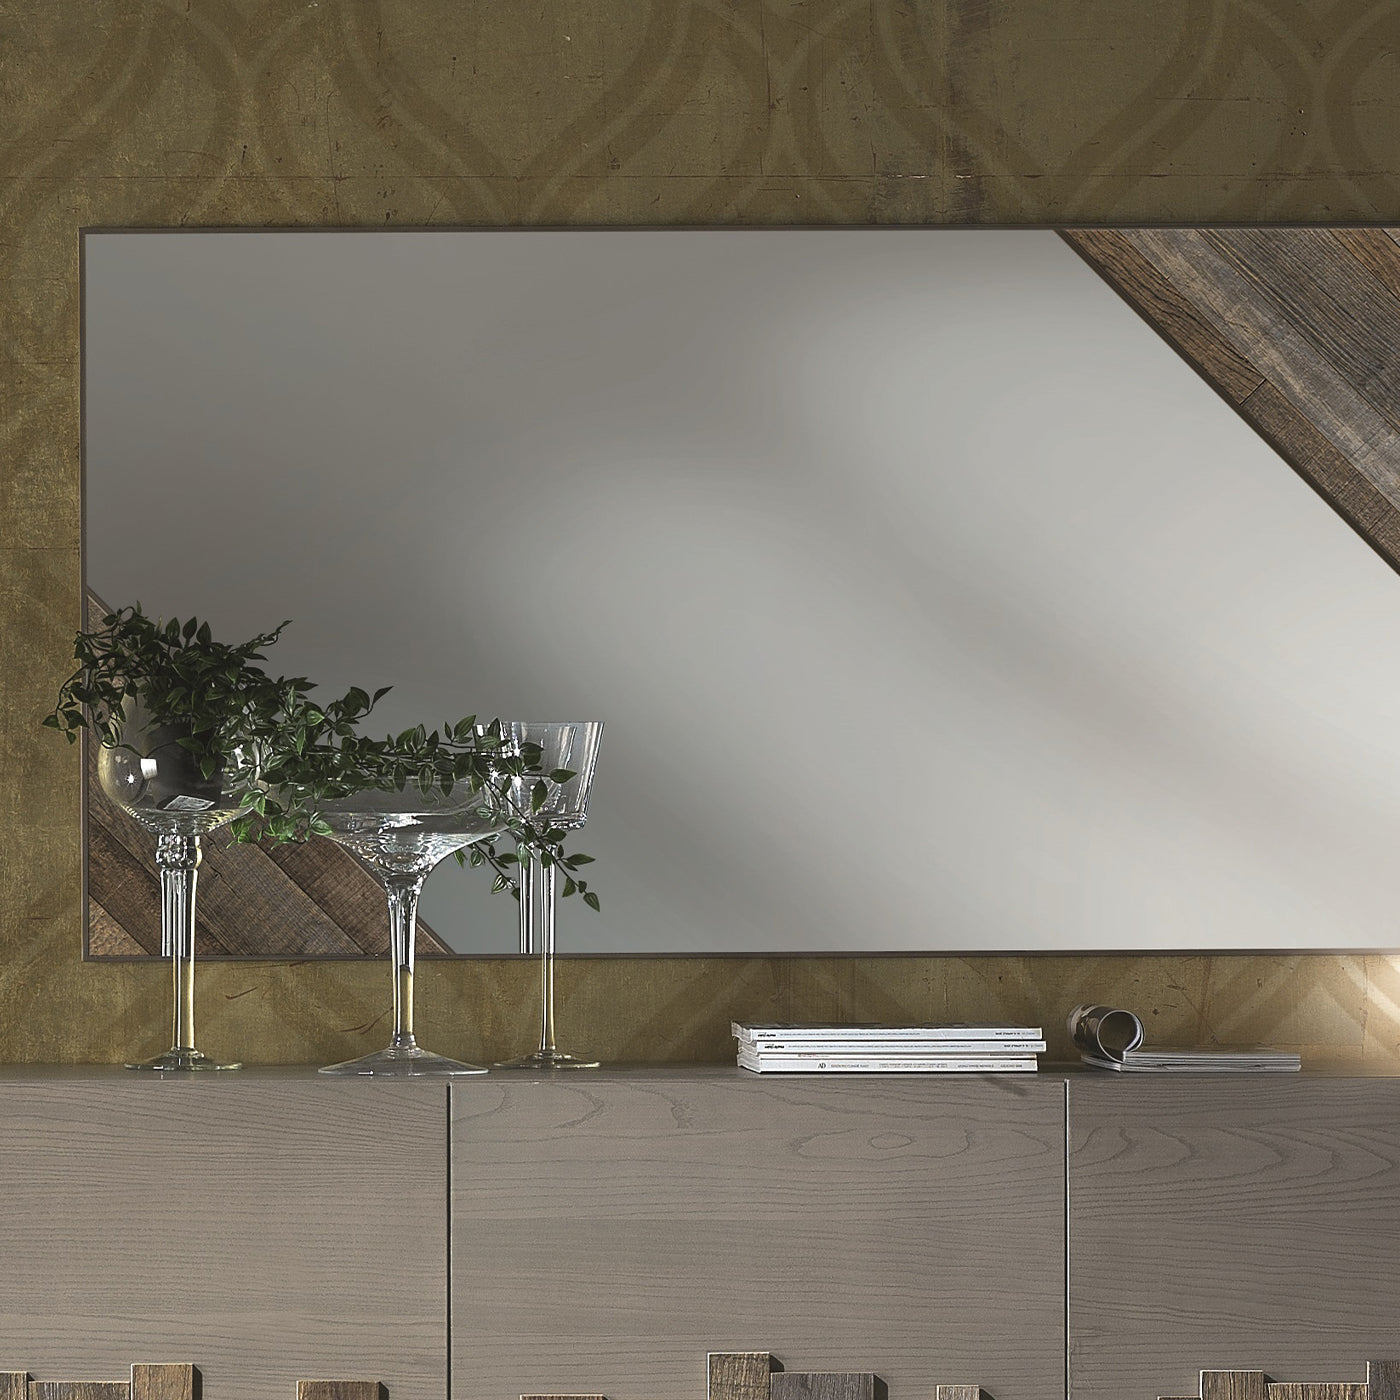 Rectangular Mirror with Old Wood Inlays - Alternative view 1